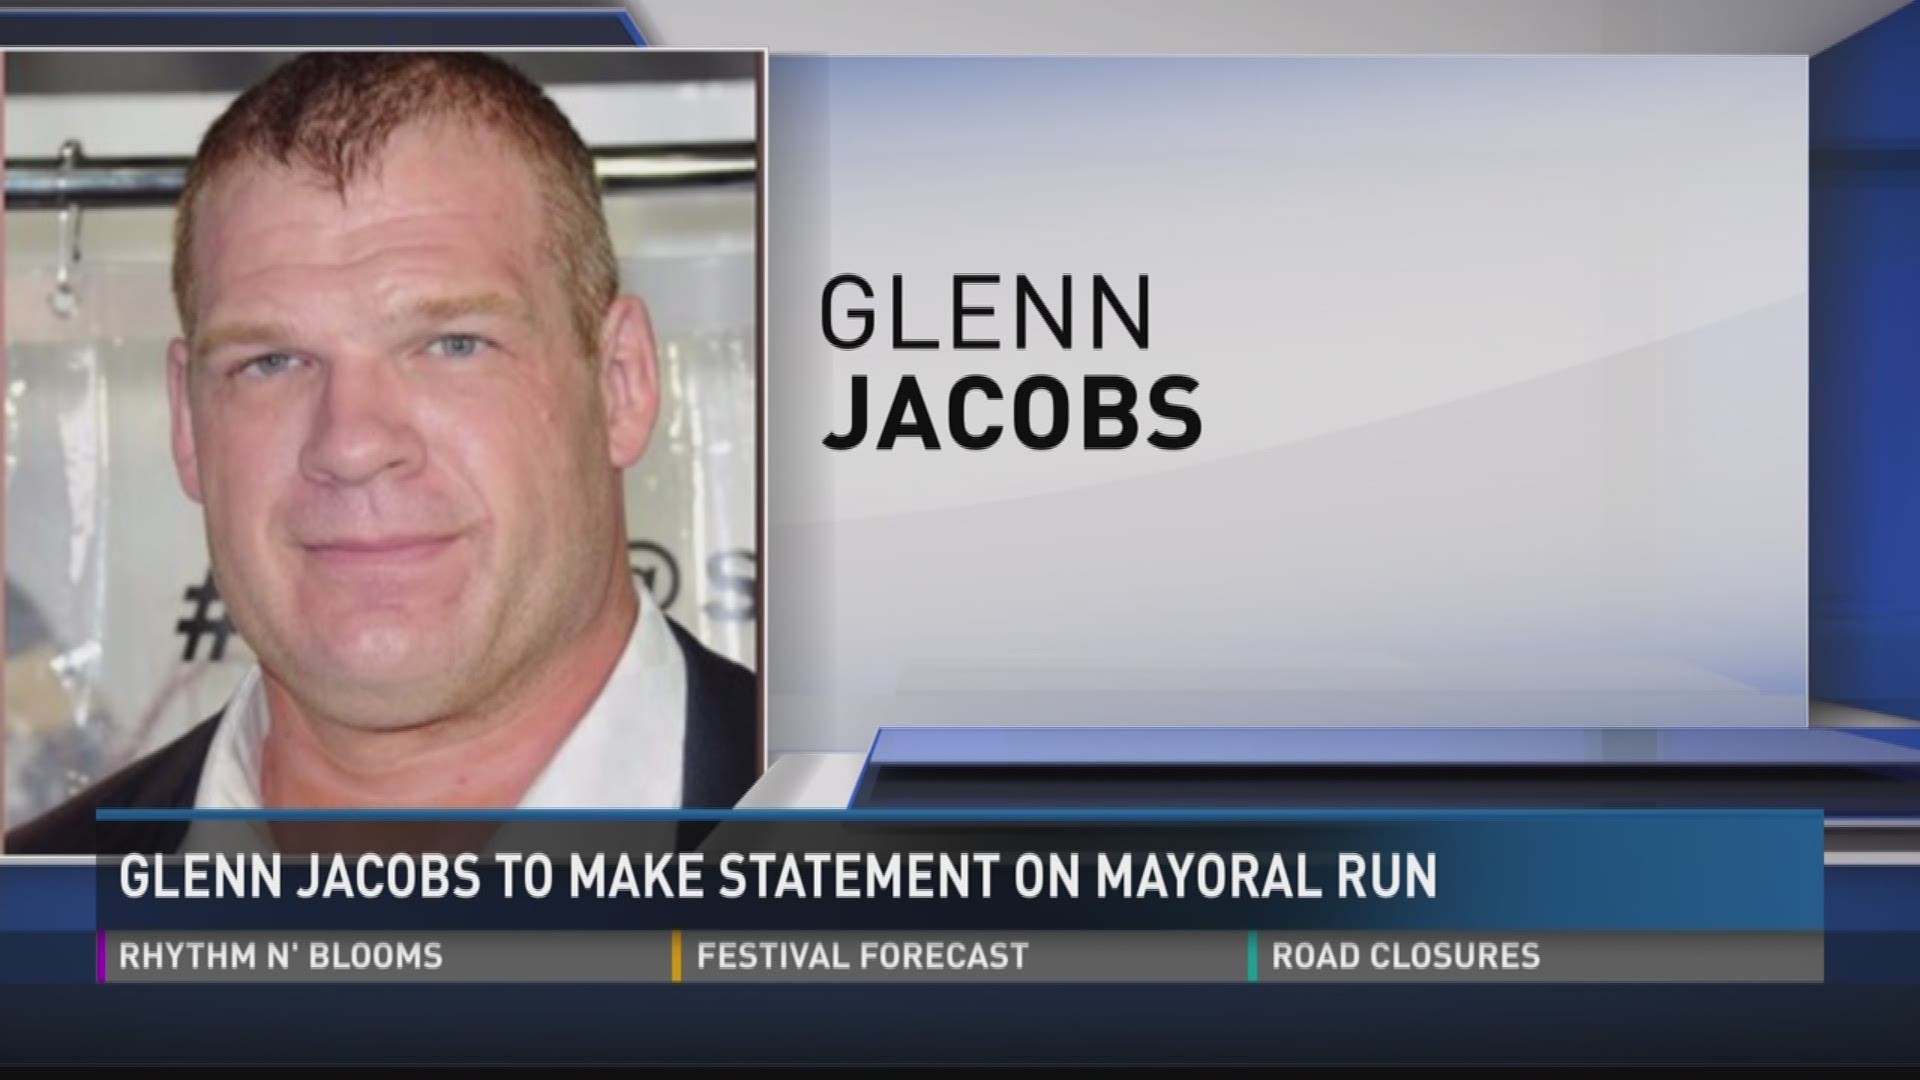 April 7, 2017: East Tennessee businessman Glenn Jacobs, also known as pro wrestler Kane, is planning a special announcement about a potential mayoral run. 